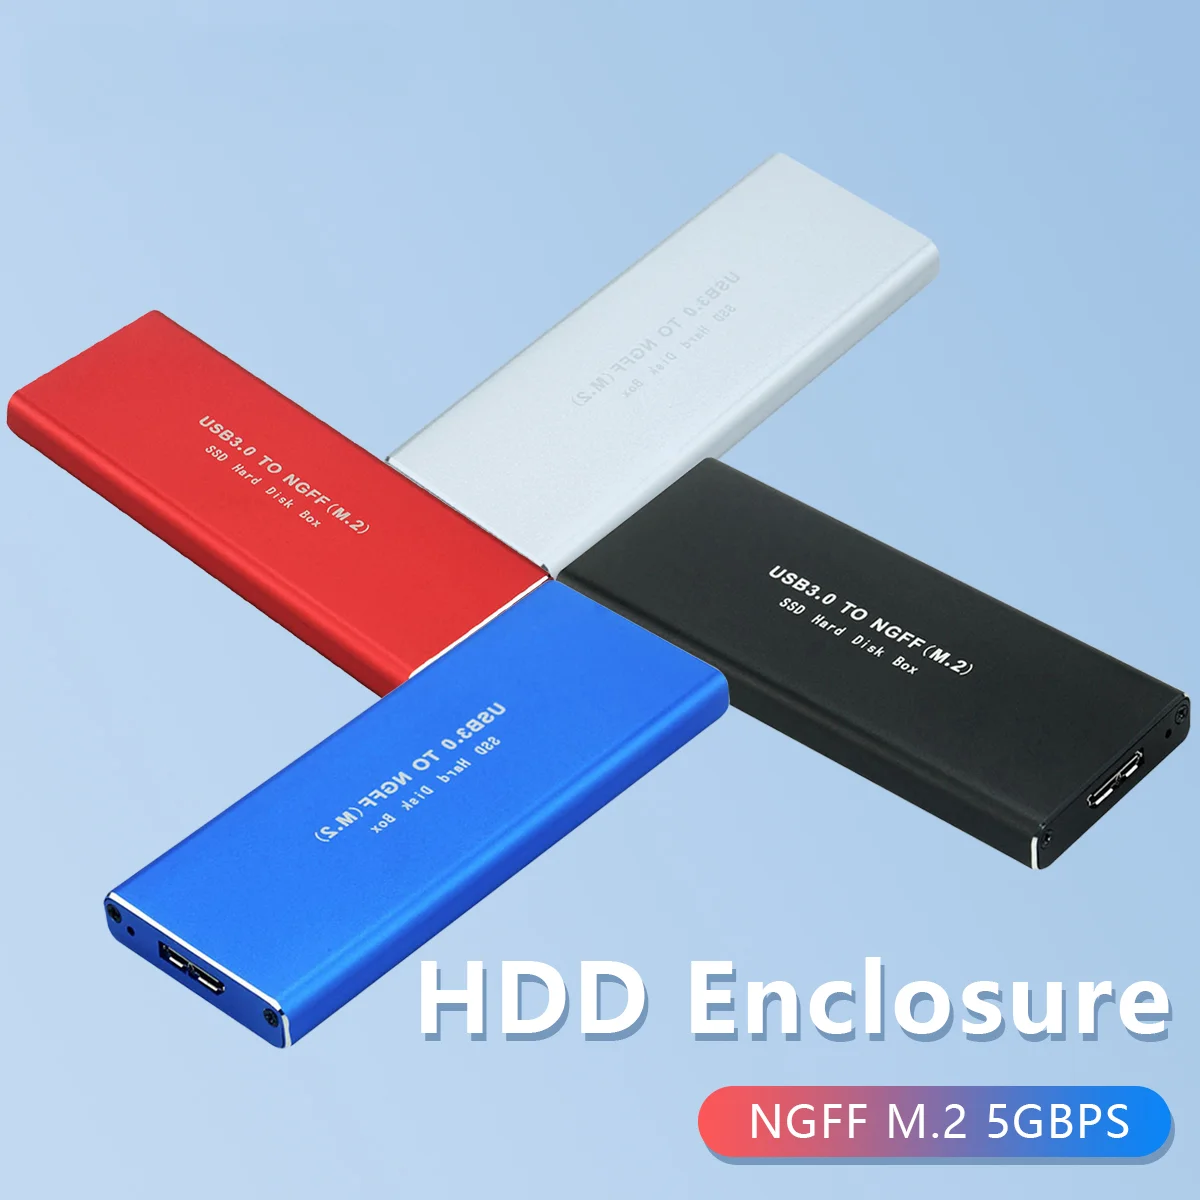 

NGFF Hard Disk External M.2 Solid State 5GBPS 1.8" SSD Cooling Metal Case USB3.0 PC for 2230/2242/2260/2280 Mobile HDD Enclosure